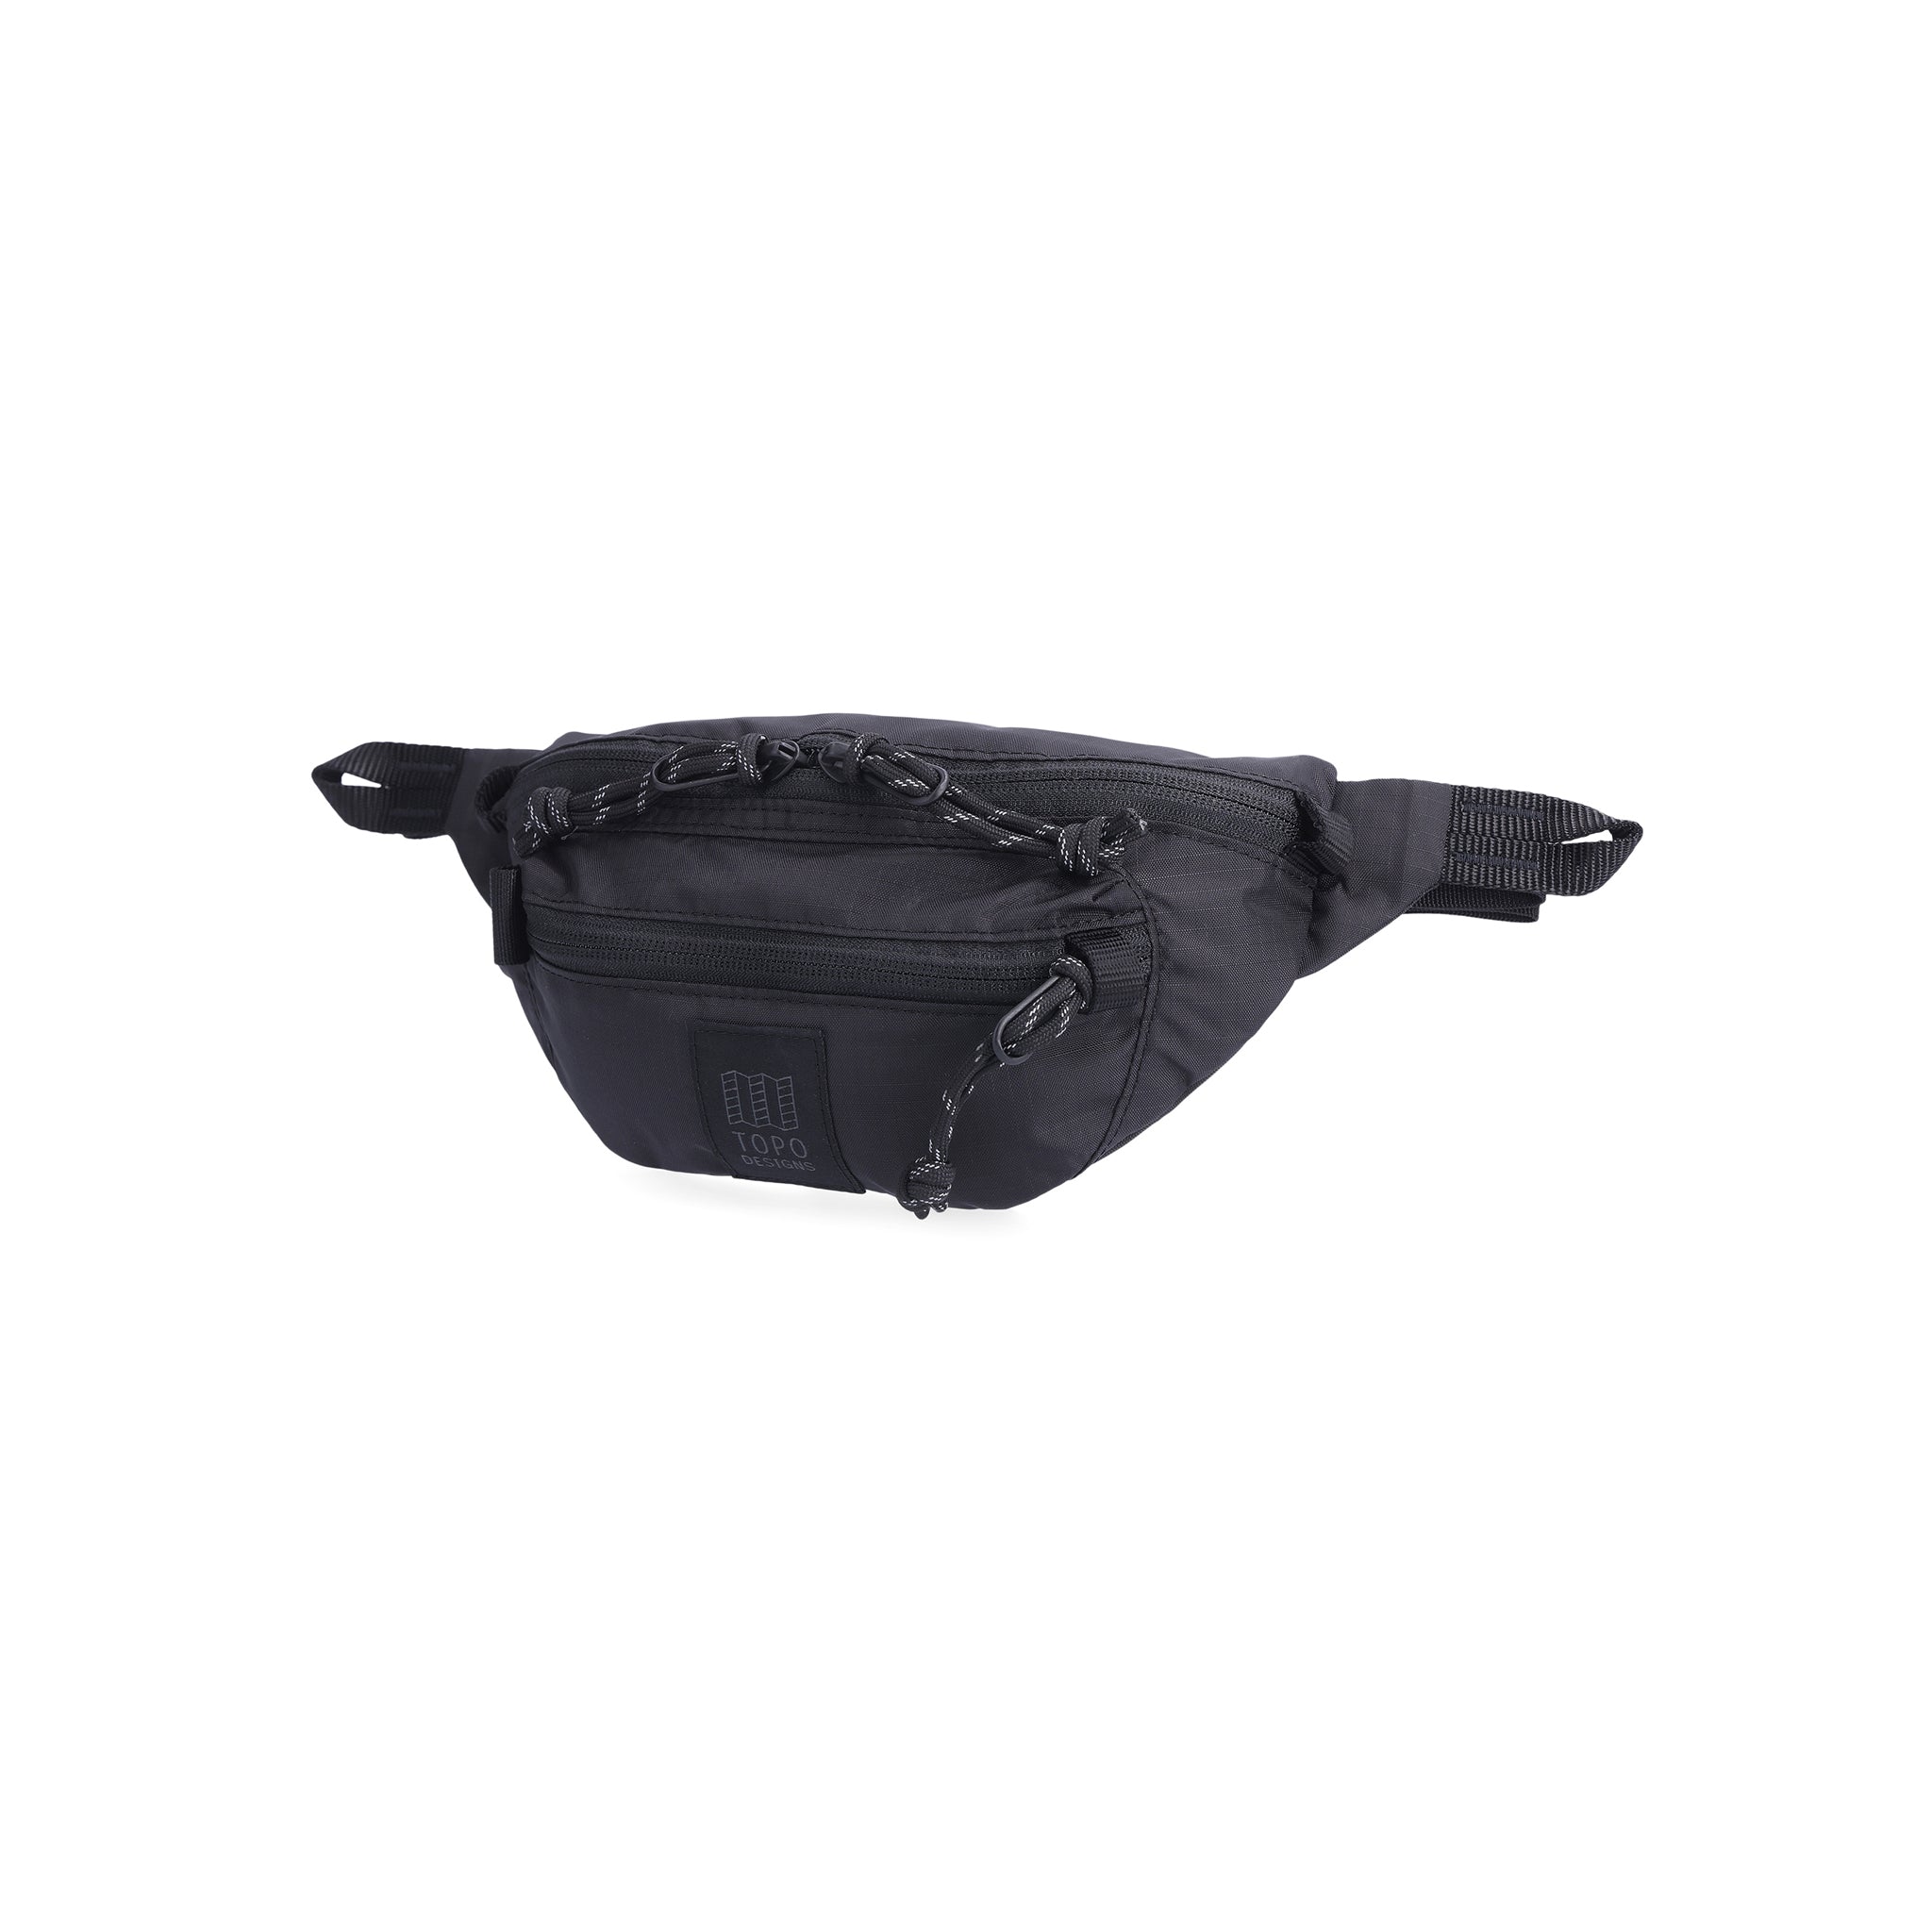 Side view of Topo Designs Mountain Waist Pack in lightweight recycled "Black / Black" nylon.